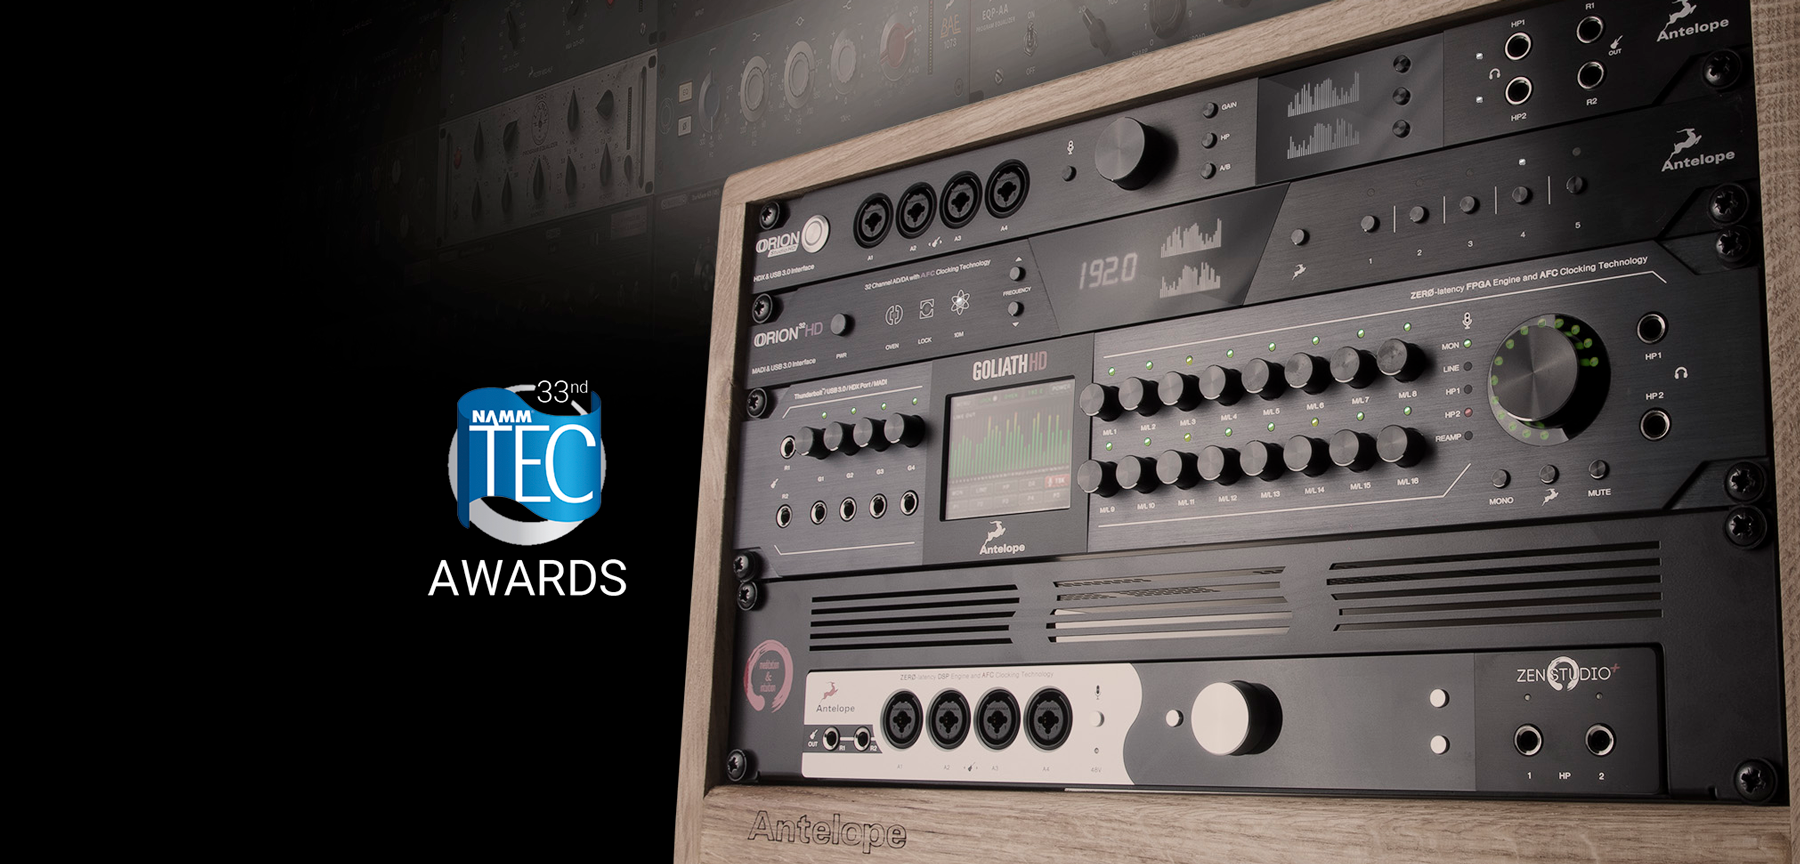 Four NAMM TEC Awards nominations for Antelope Audio in 2017